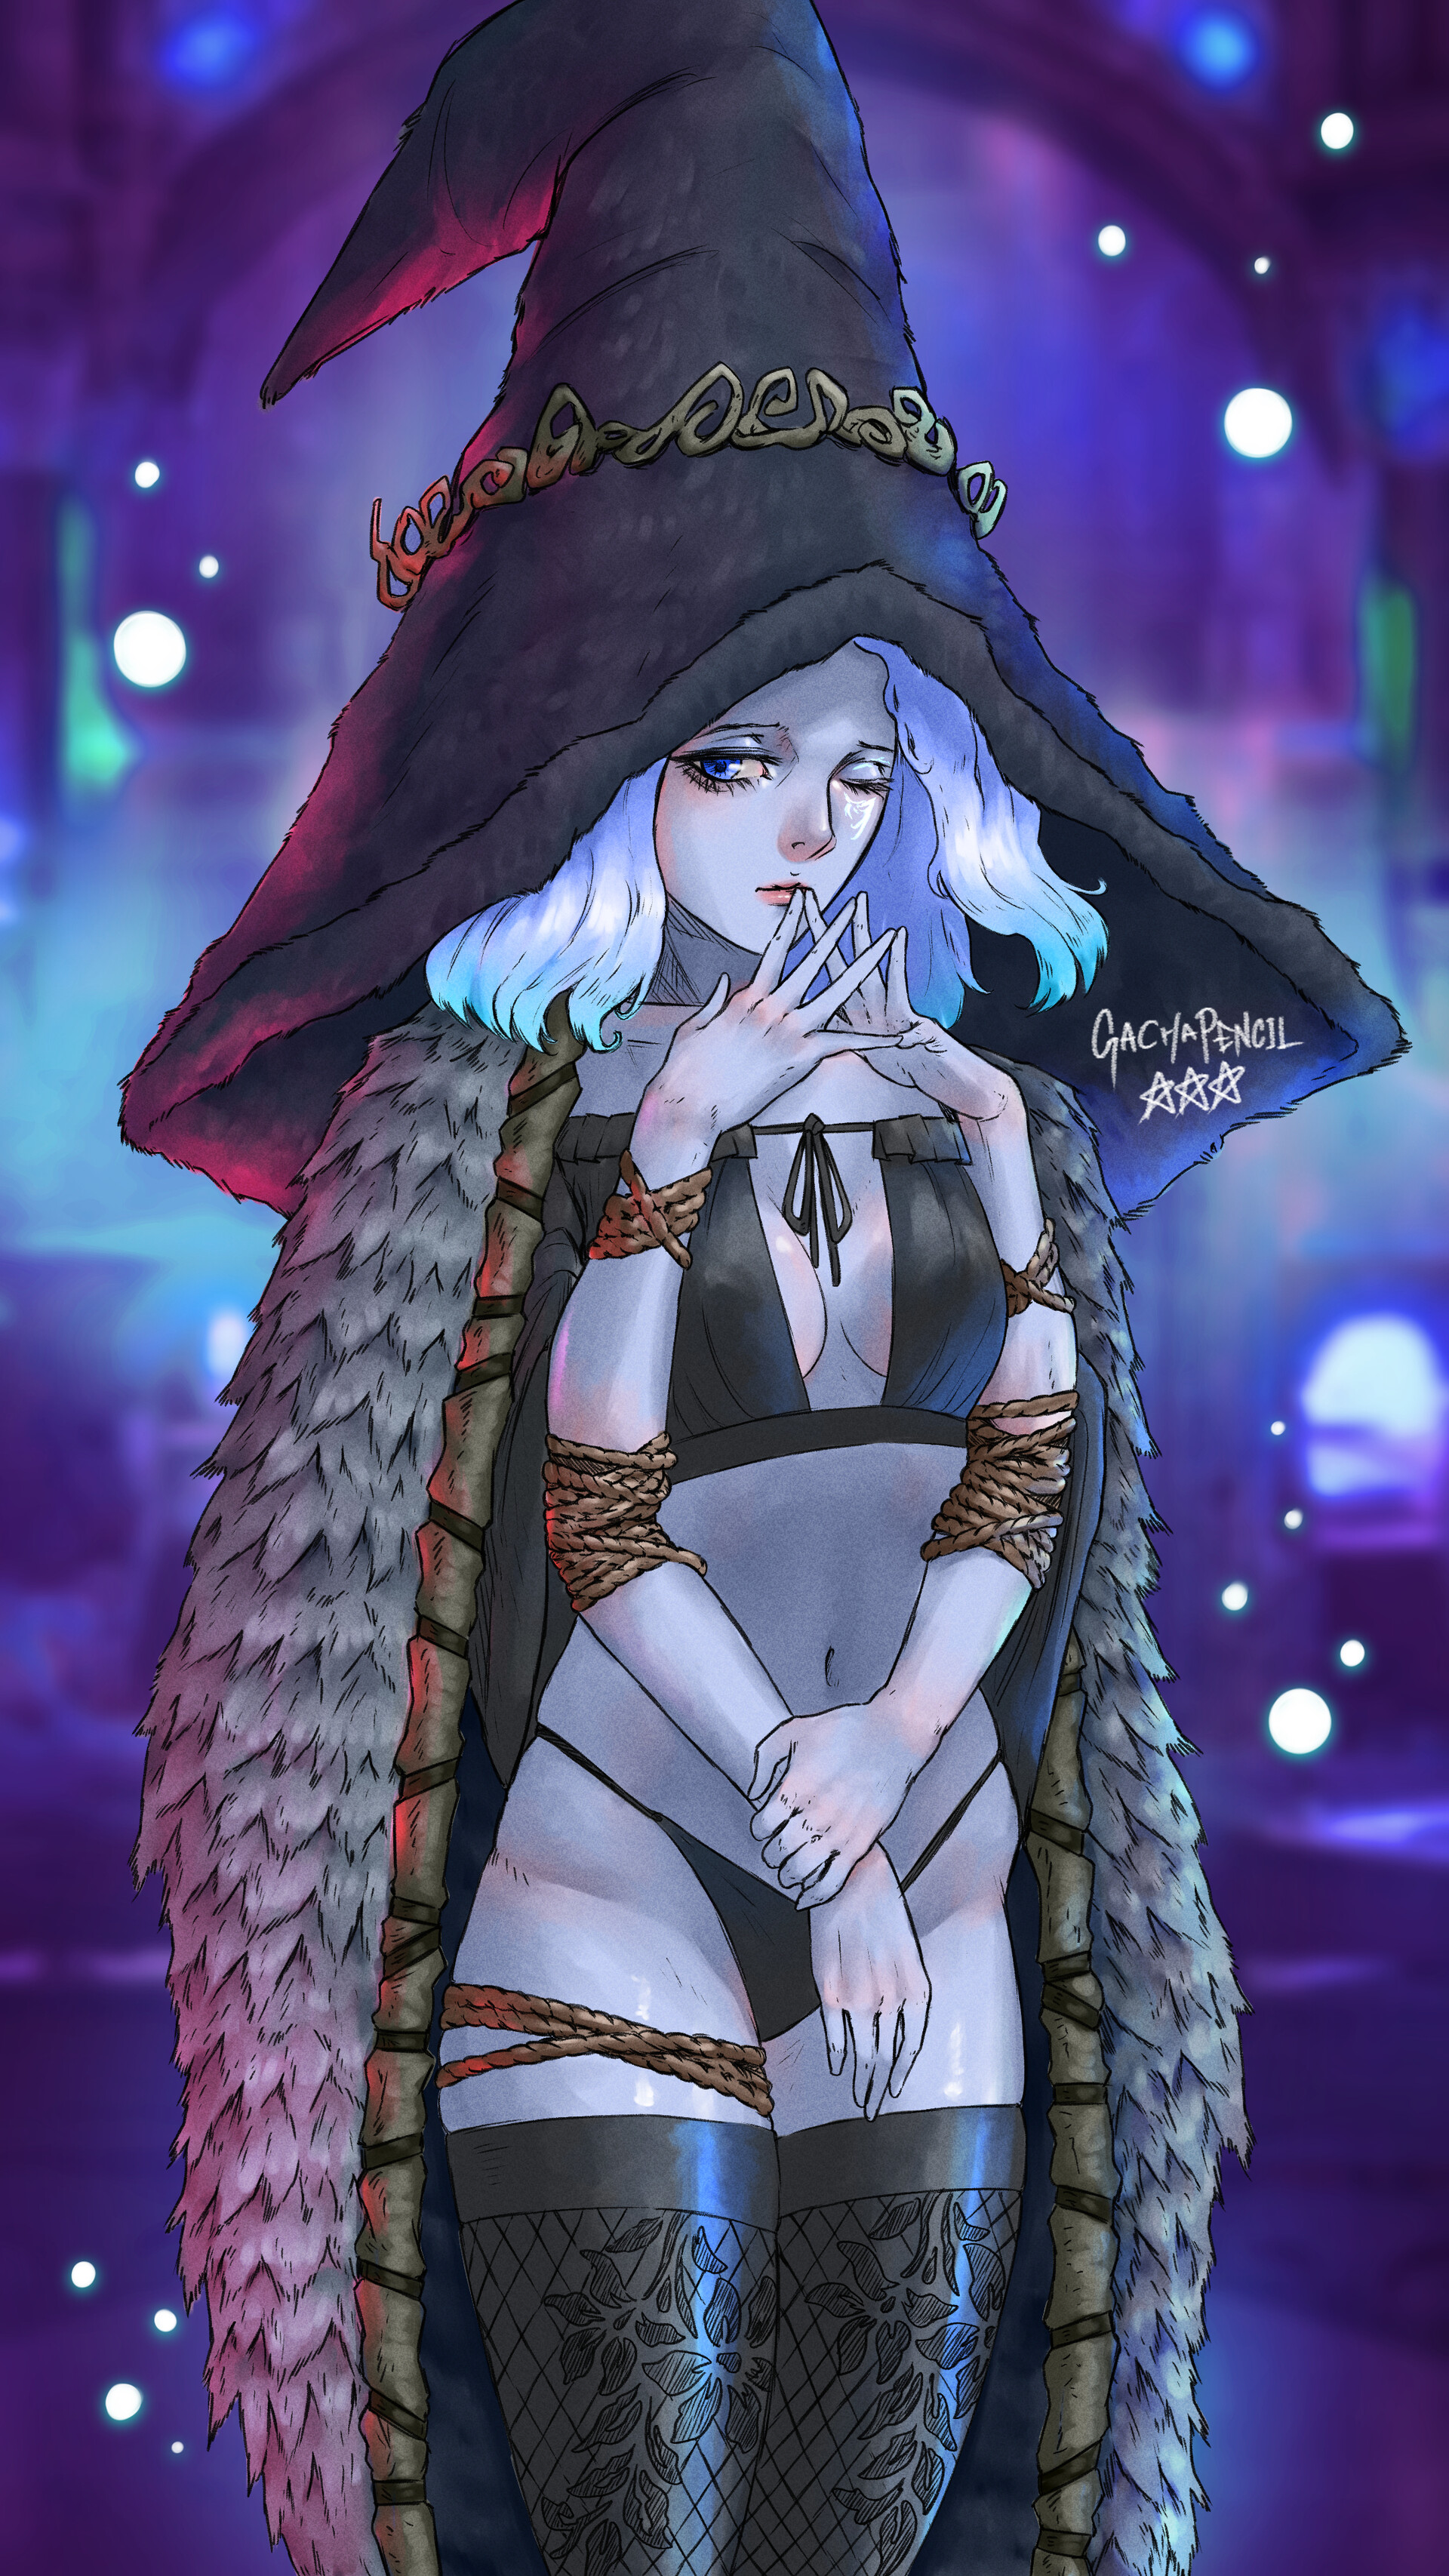 THE ART OF VIDEO GAMES on X: Fan art  Elden Ring - Ranni the Witch  Artist: sisterTAO  / X